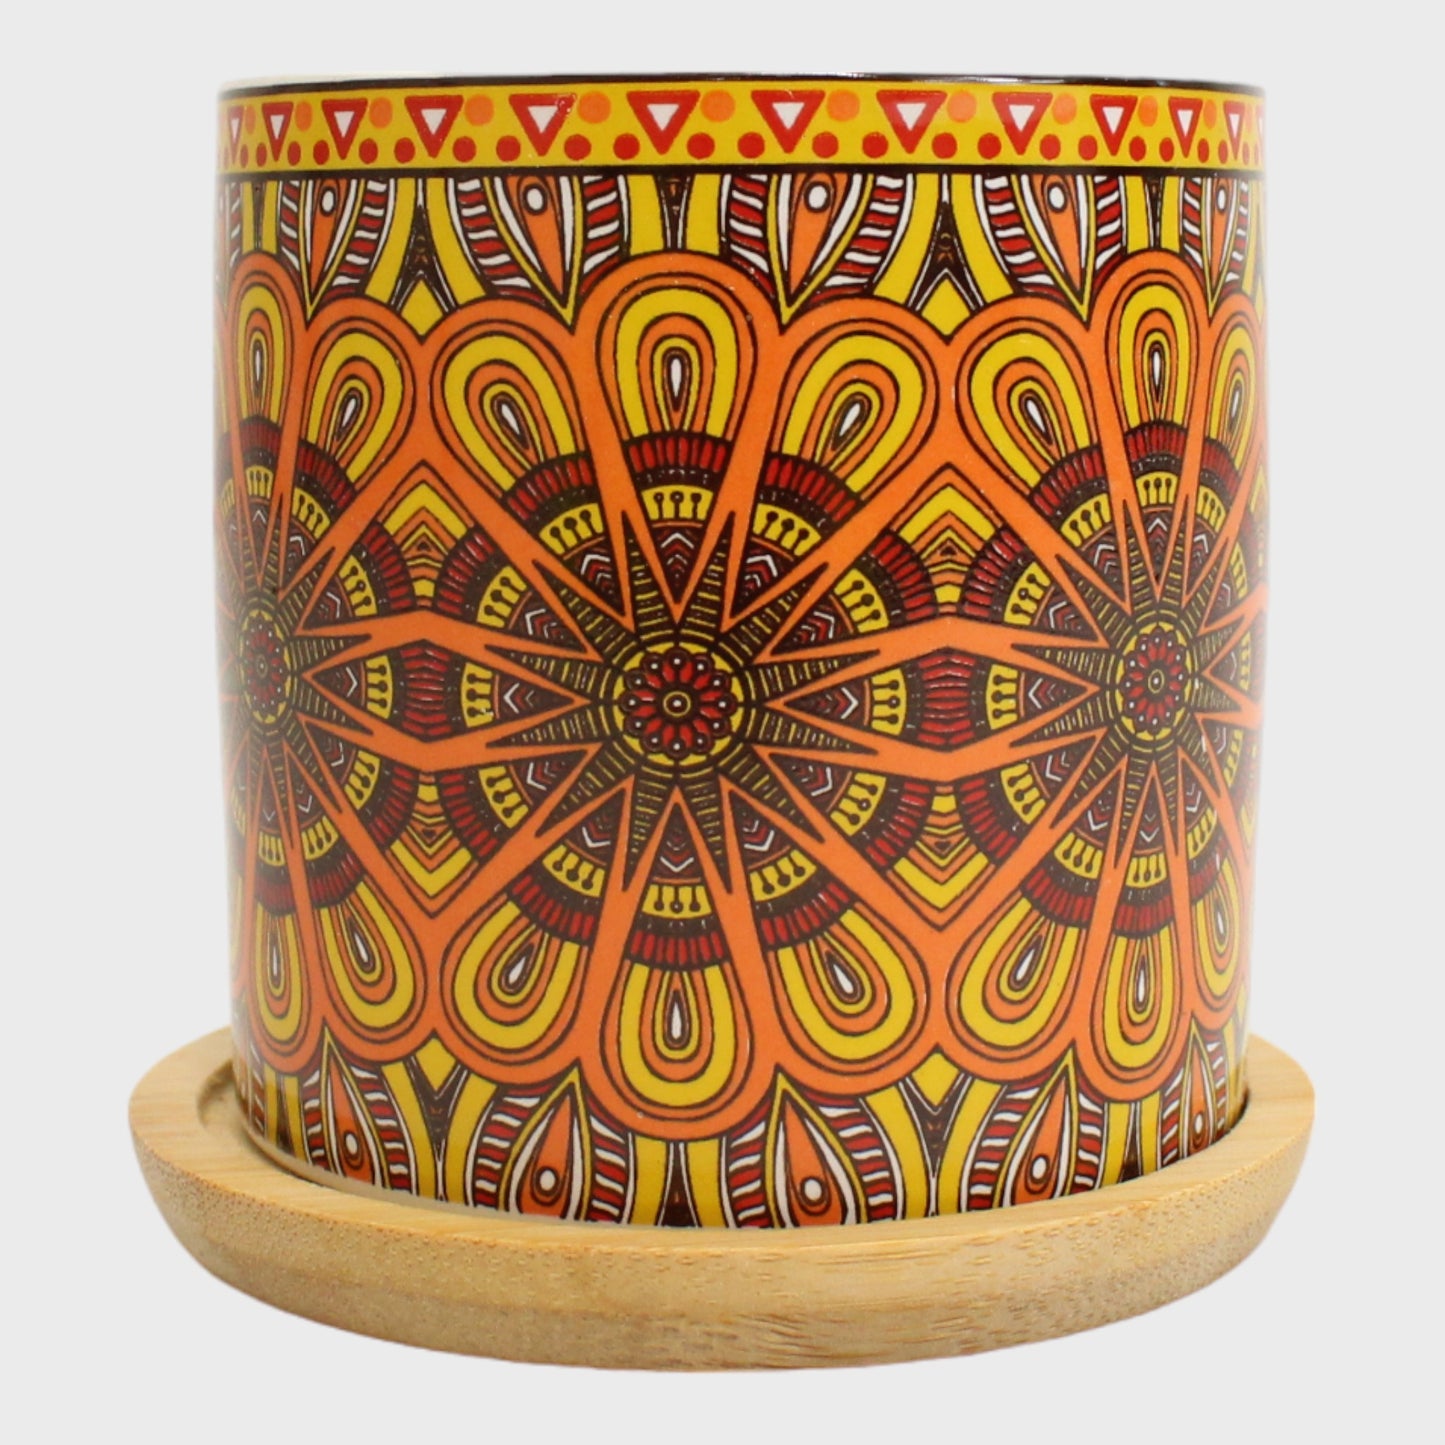 Lemon Scented Patterned Candle